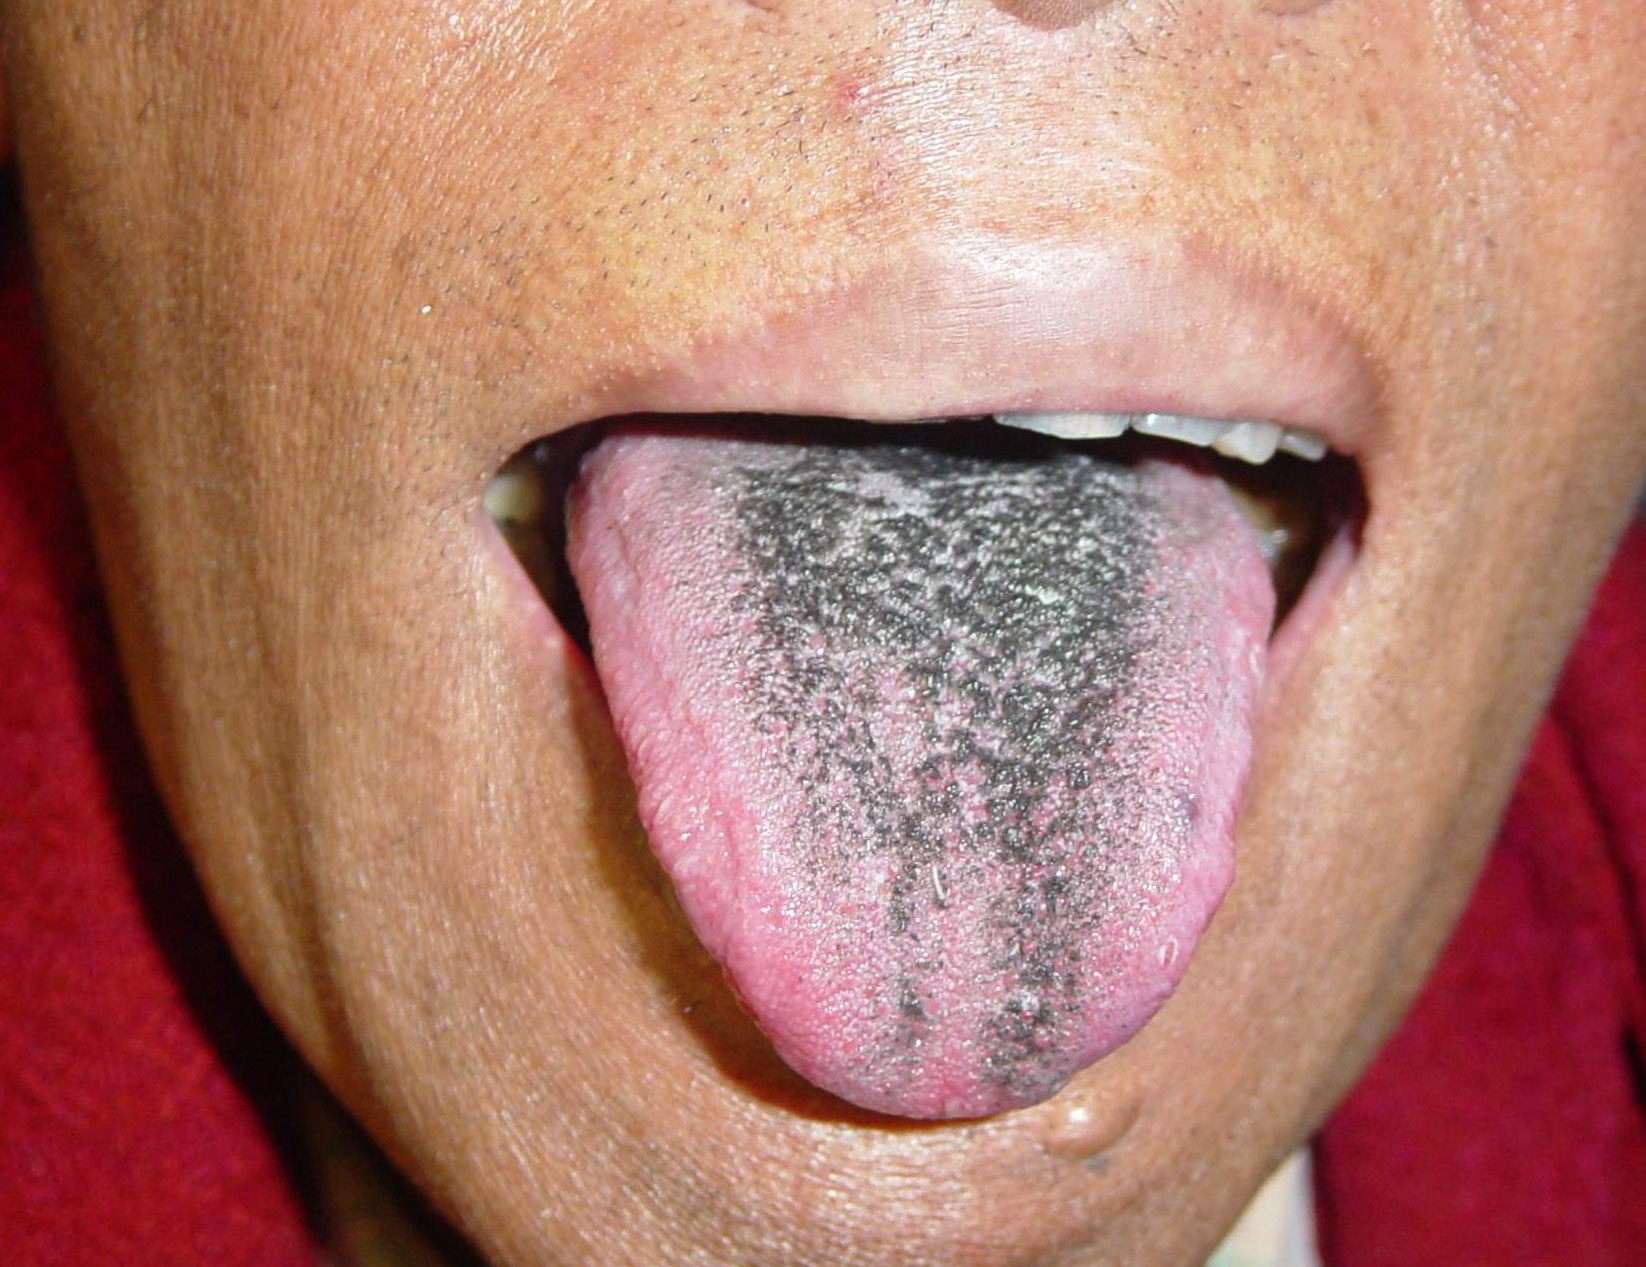 hairy tongue white or black hairy tongue hairy tongue hypertrophy